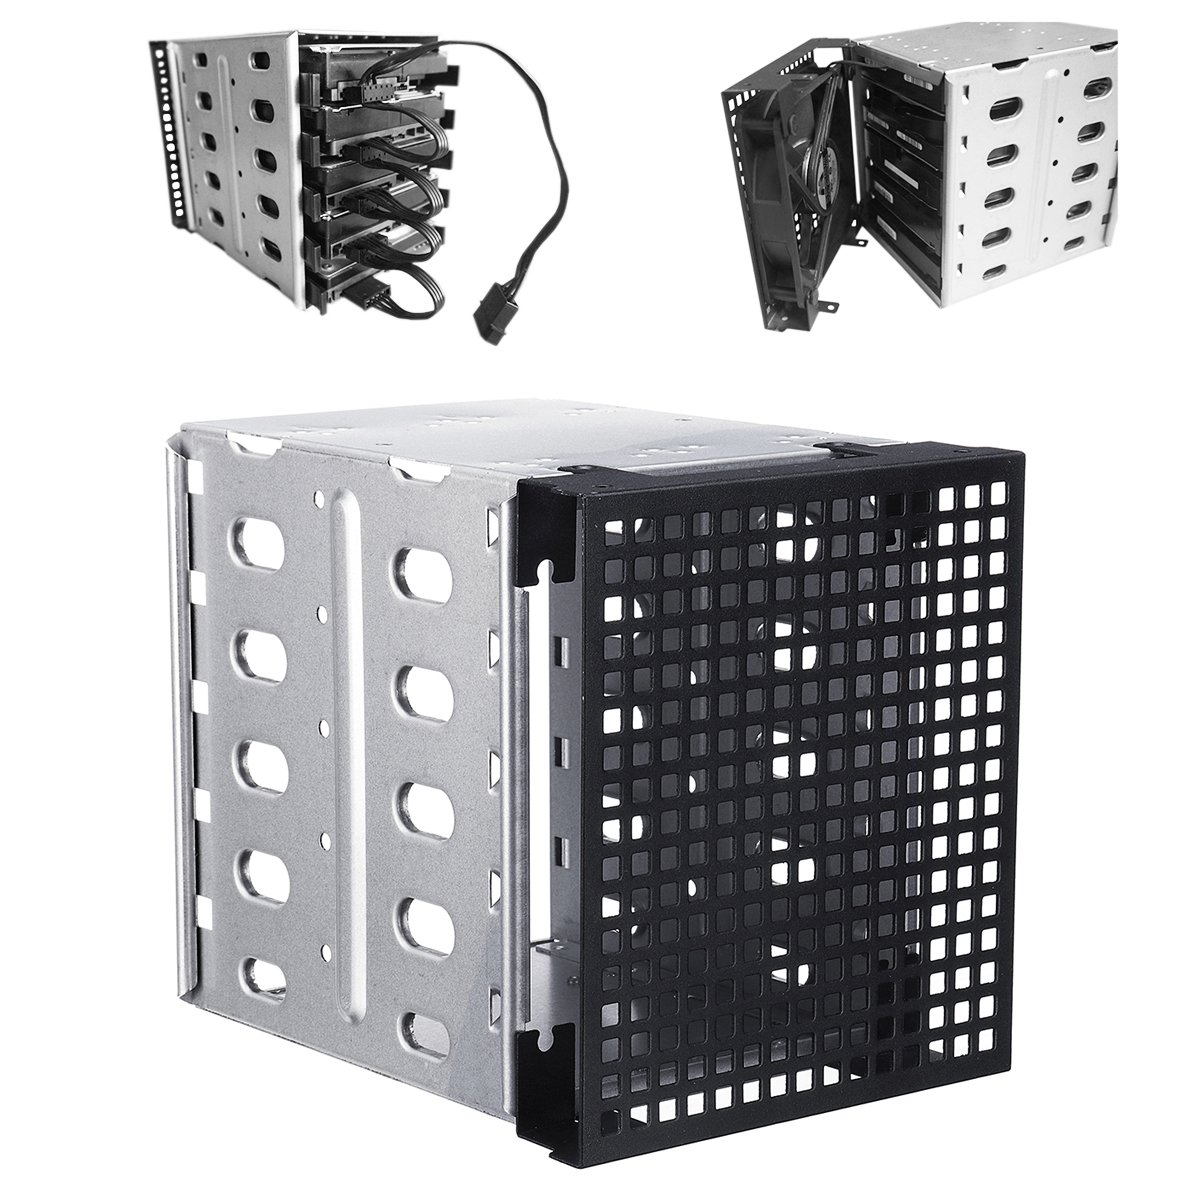 5.25" to 5x 3.5" SATA SAS HDD Cage Rack Hard Drive Tray Caddy Converter with Fan Space 2